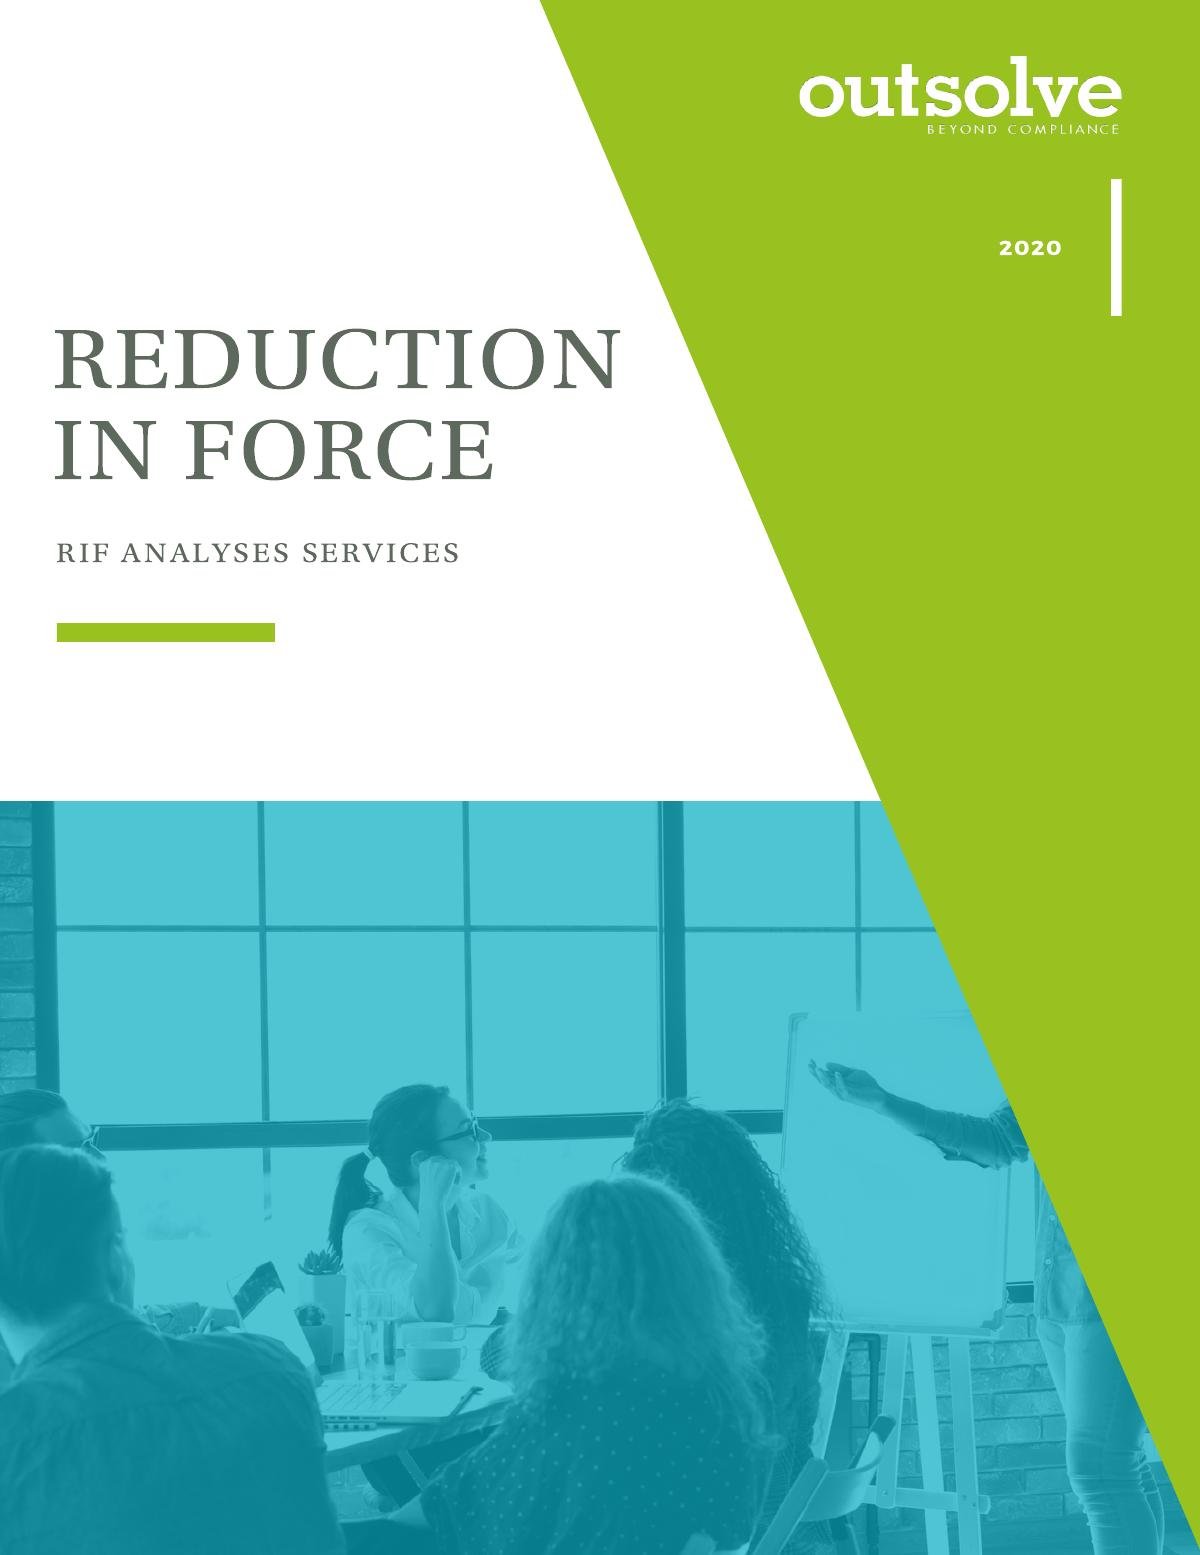 Reduction in Force Analysis - What is it?